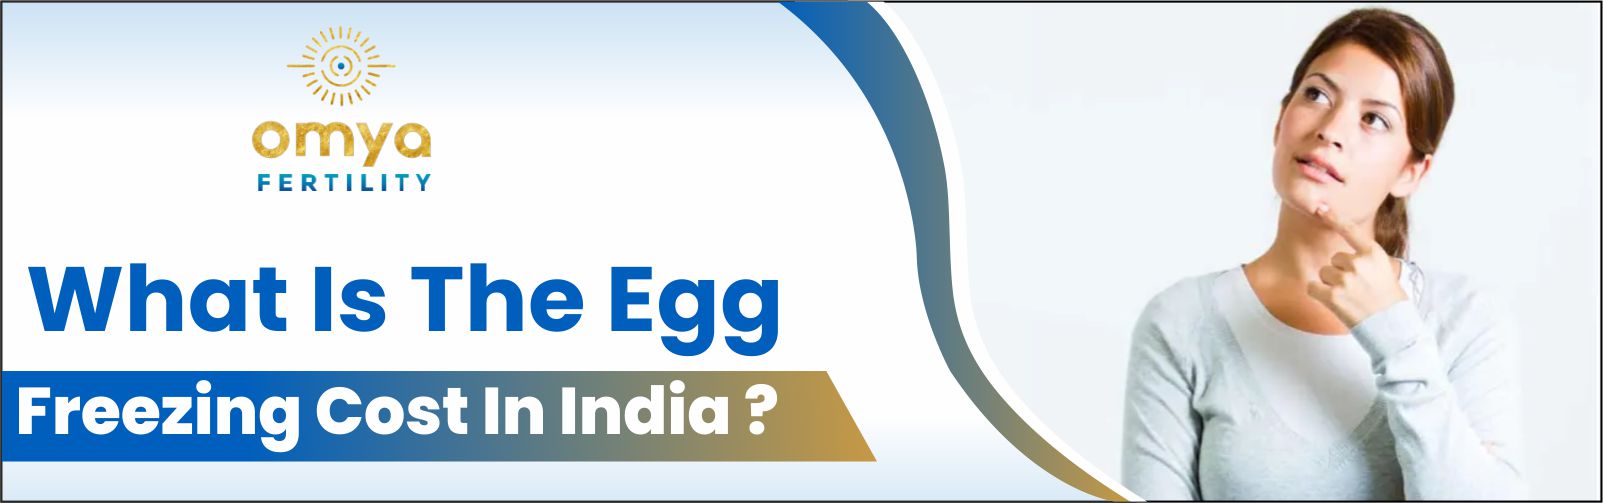 What Is The Egg Freezing Cost In India?